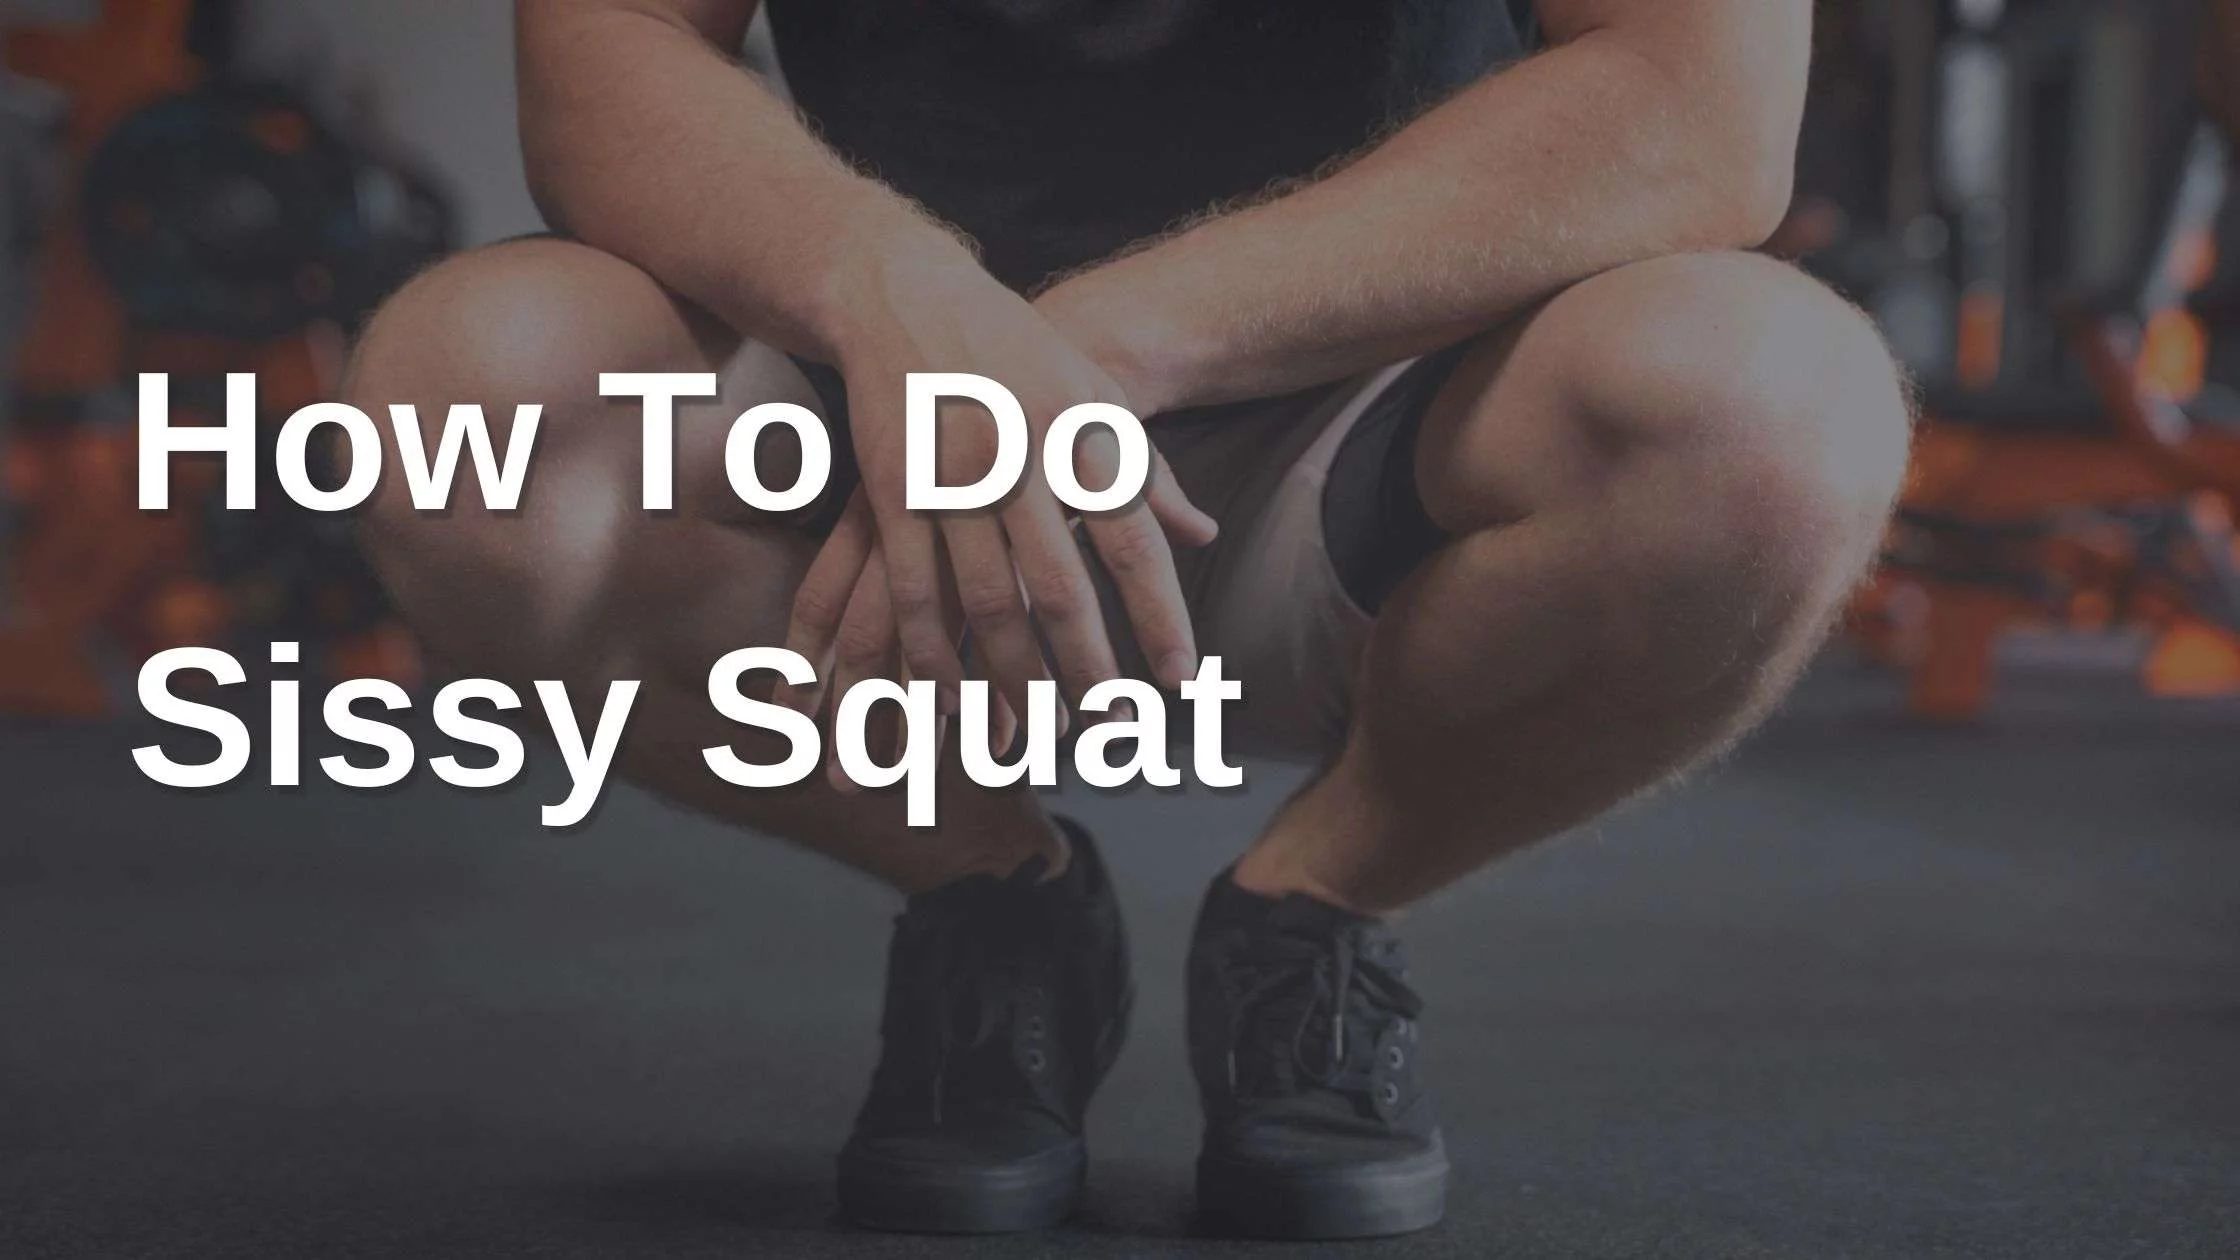 How To Do a Sissy Squat